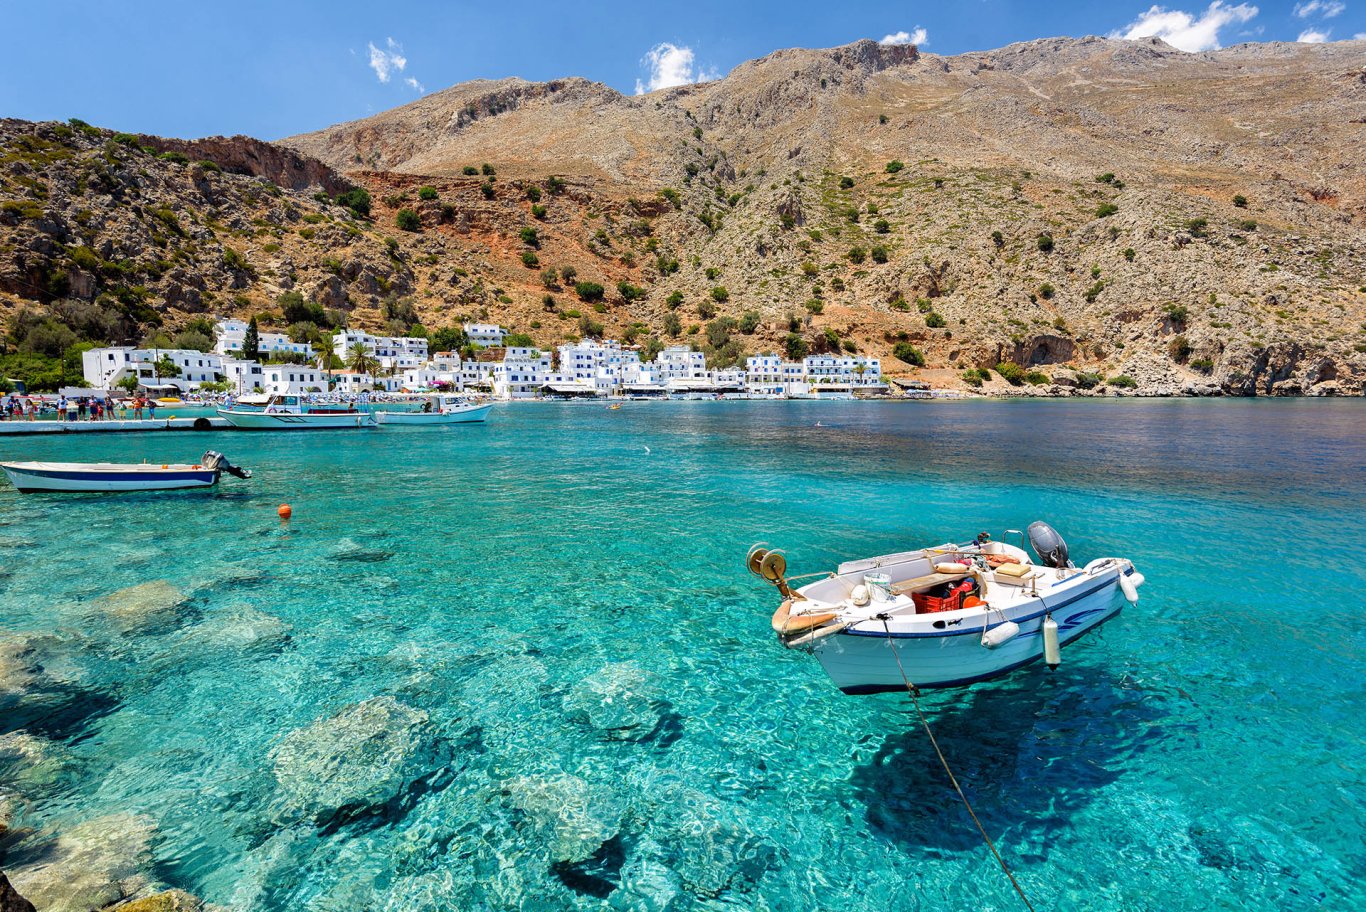 A scenic view of a small boat on the crystal clear blue water and landscapes of the Greek island in the background.